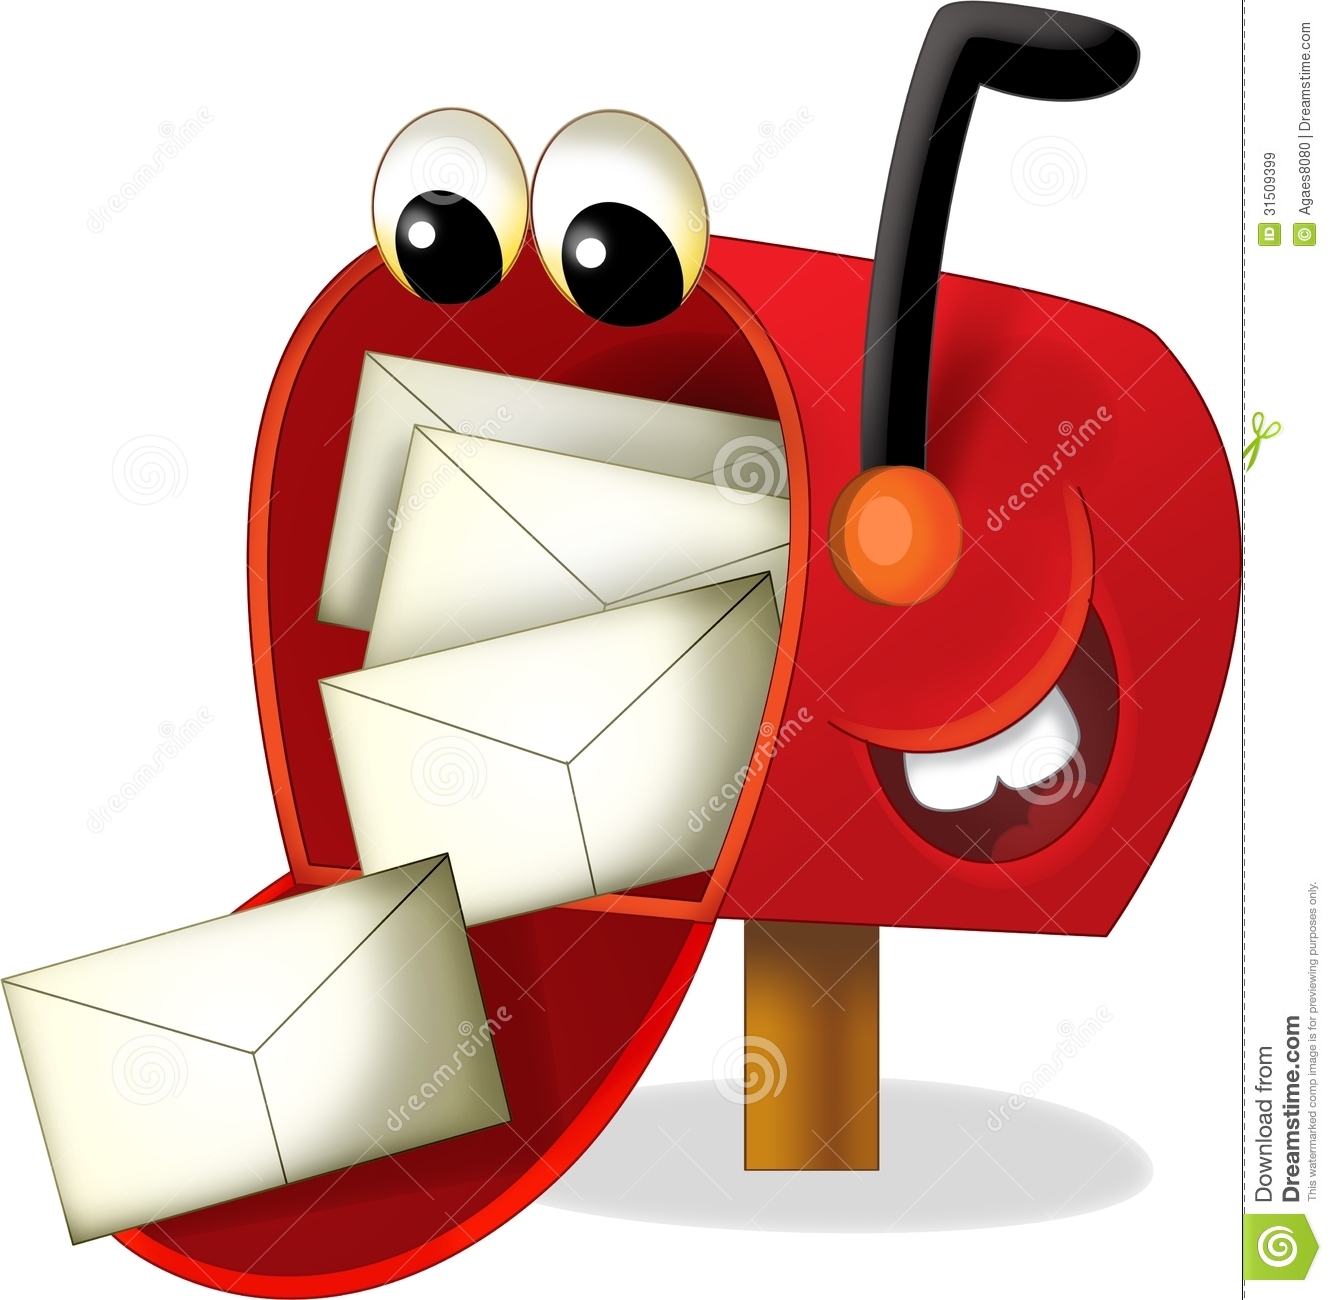 The Cartoon Mailbox   Illustration For The Children Royalty Free Stock